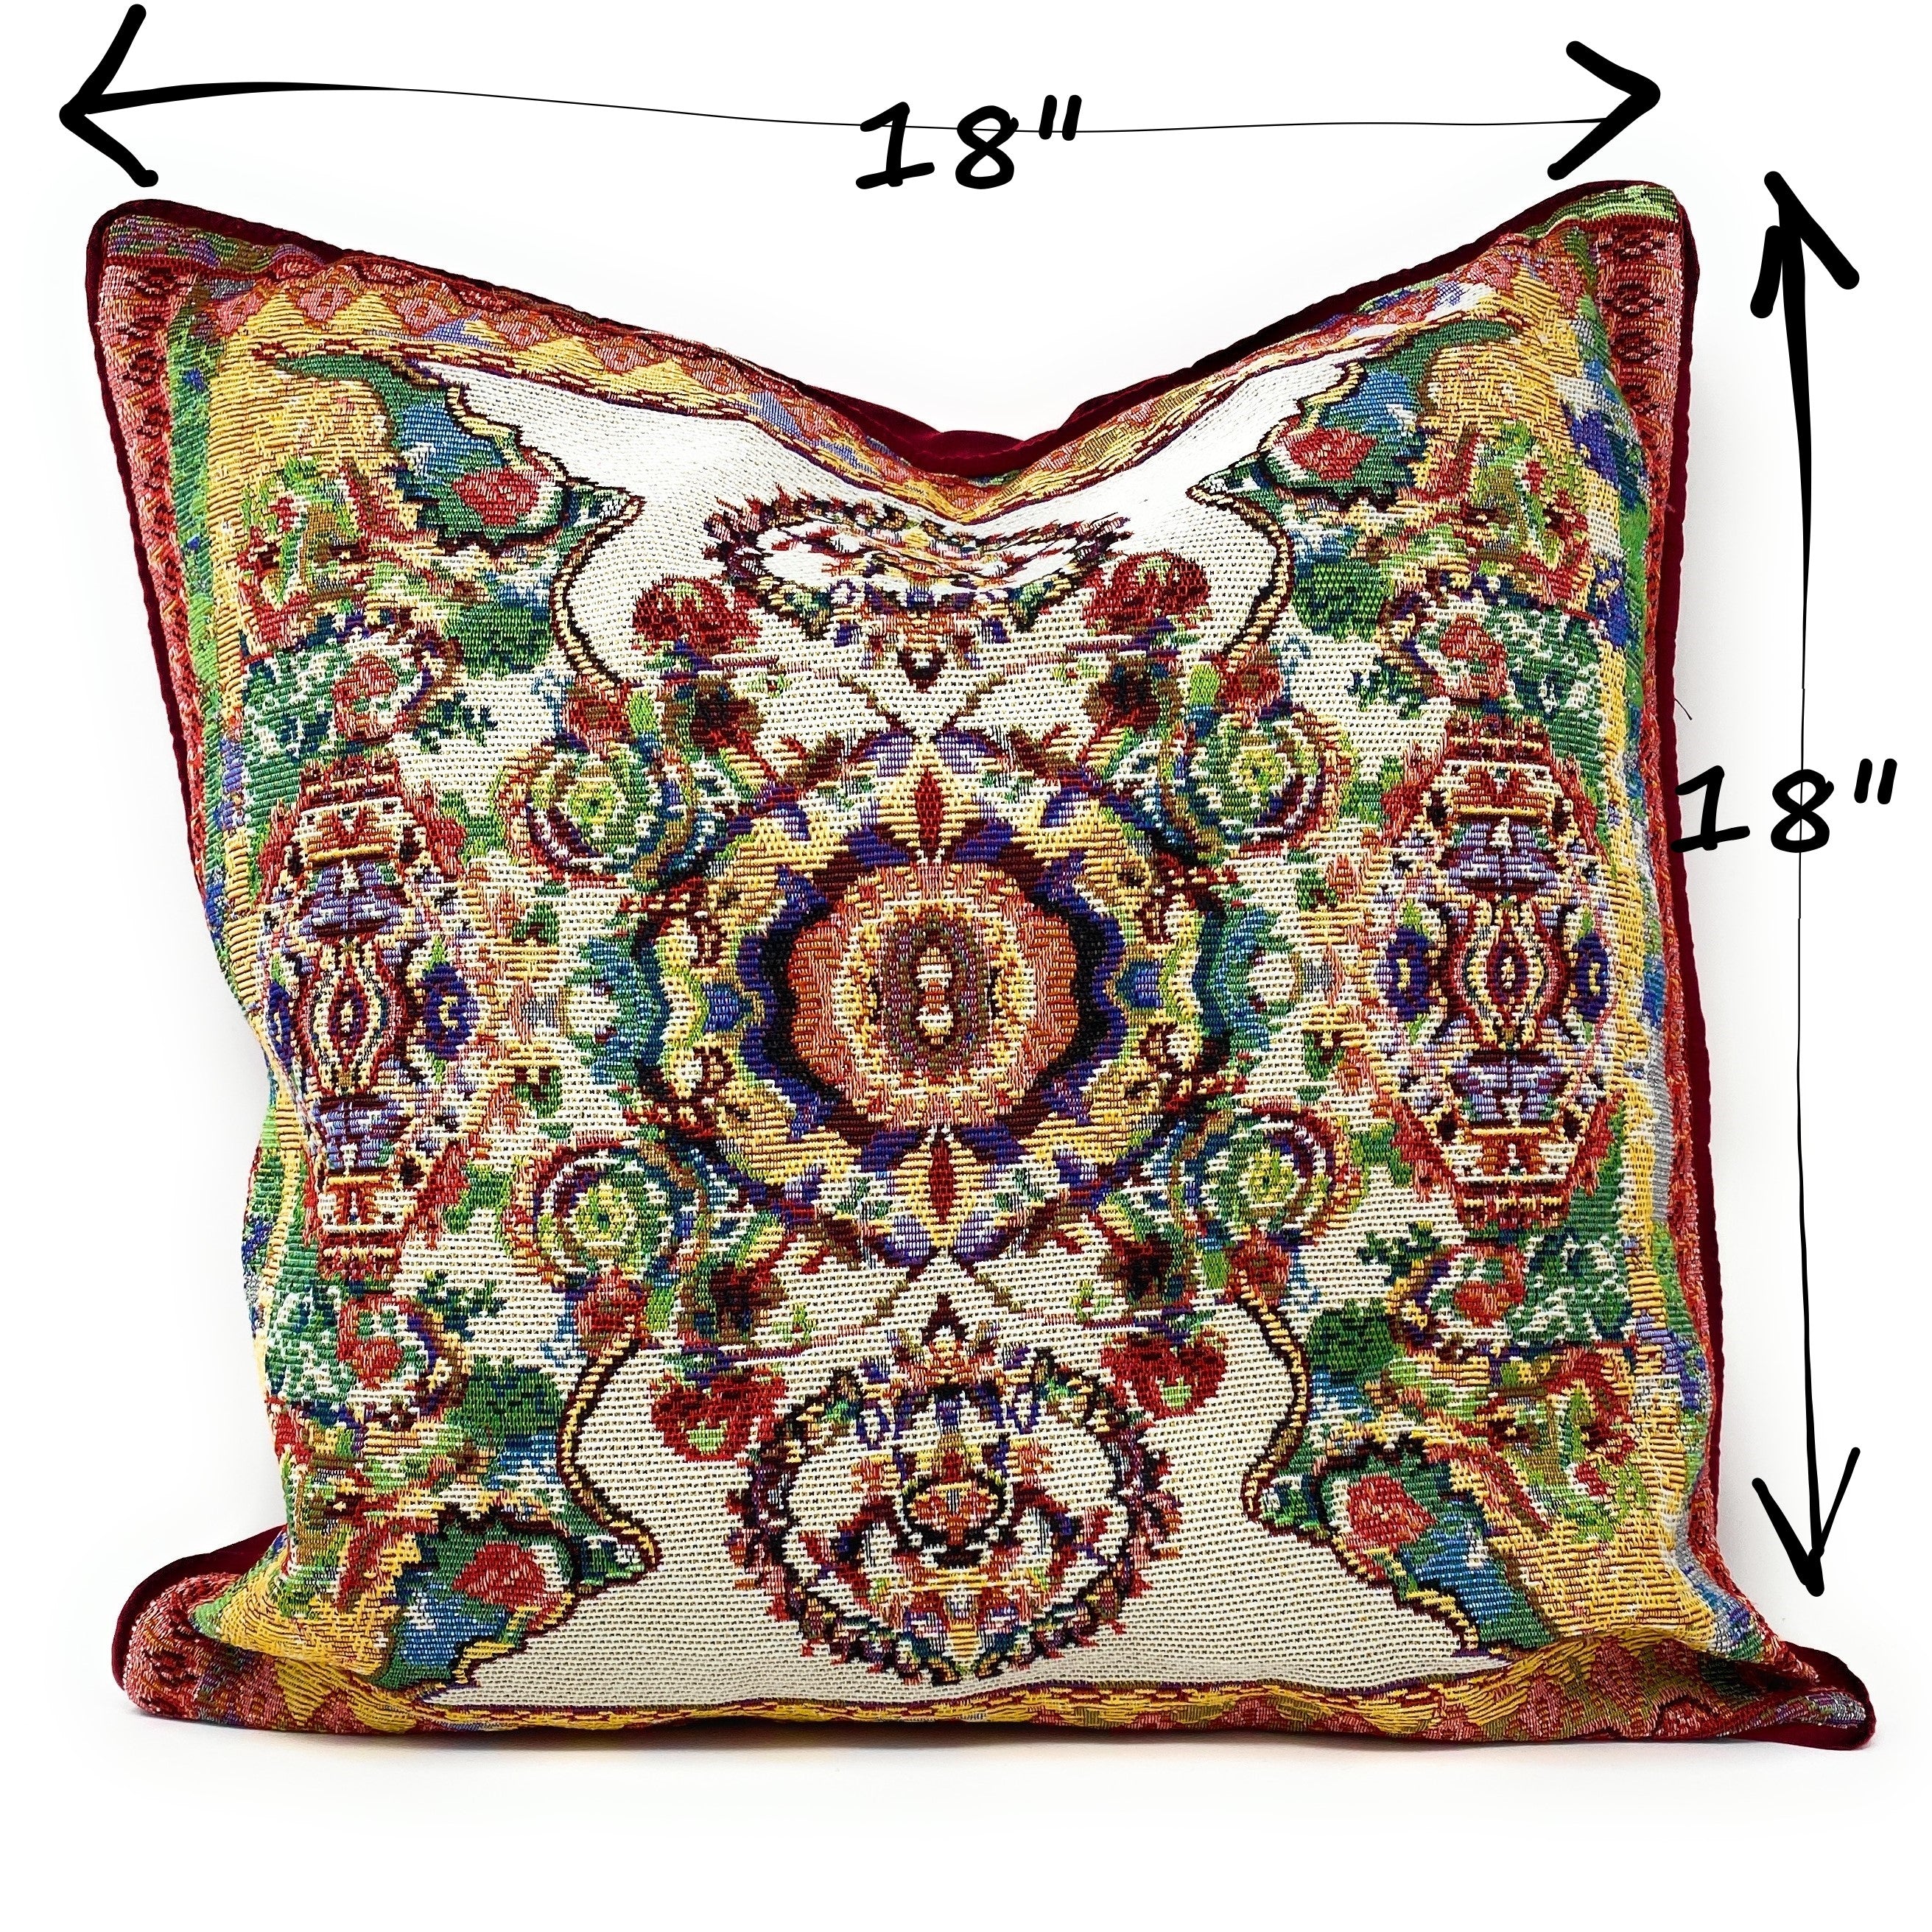 Tache Elegant Ivory Colorful Ornate Paisley Woven Tapestry Throw Pillow Cover (18193)